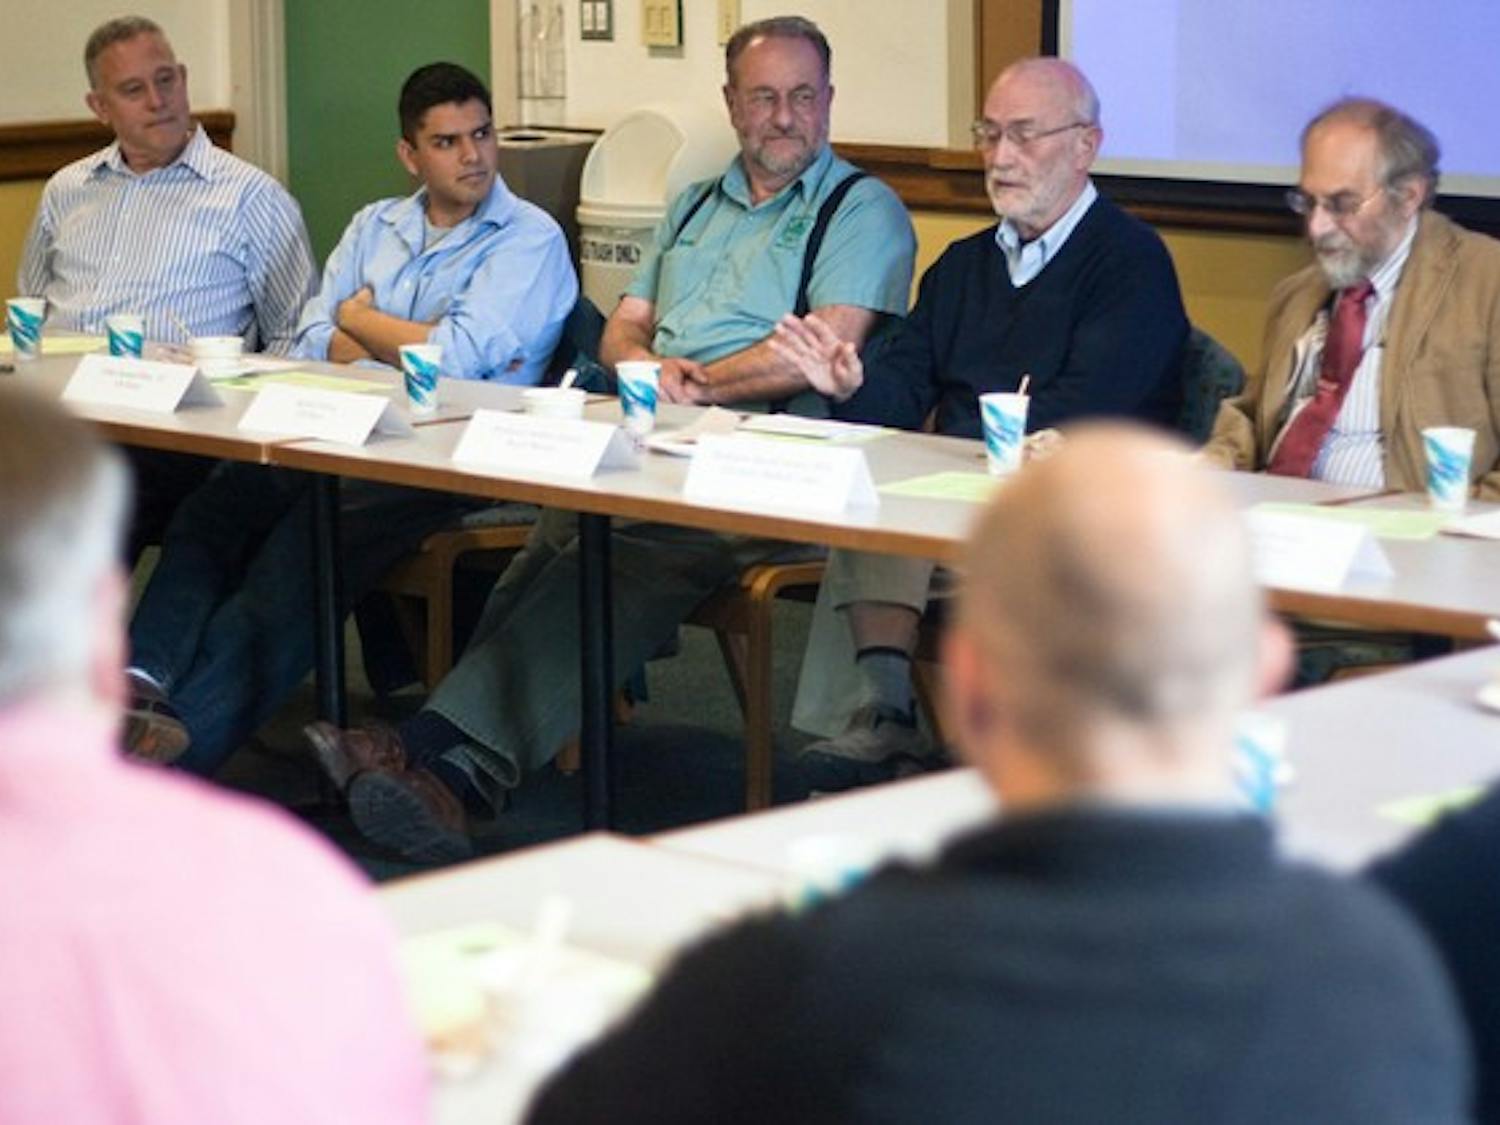 Just one week after Memorial Day, seven military veterans from throughout the Dartmouth community spoke about their years of service and its effect on their lives in a panel discussion held in Collis Center on Monday.